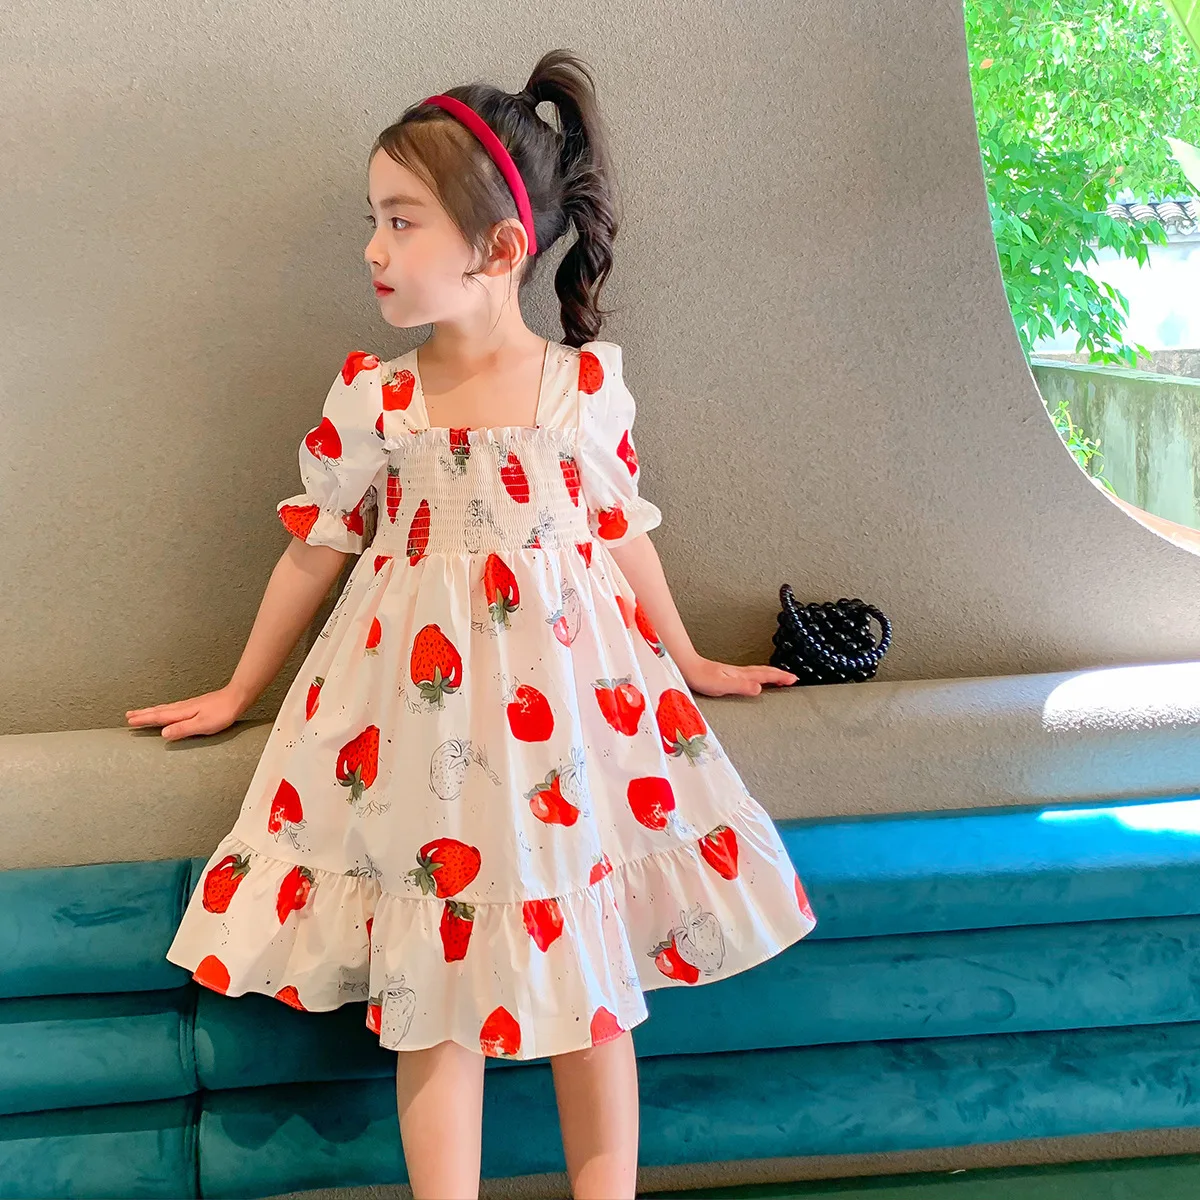 Wholesale Fashionable High Quality Kids Frock Children Clothes Latest Cute  Strawberry Print Flutter Girls Dresses From malibabacom